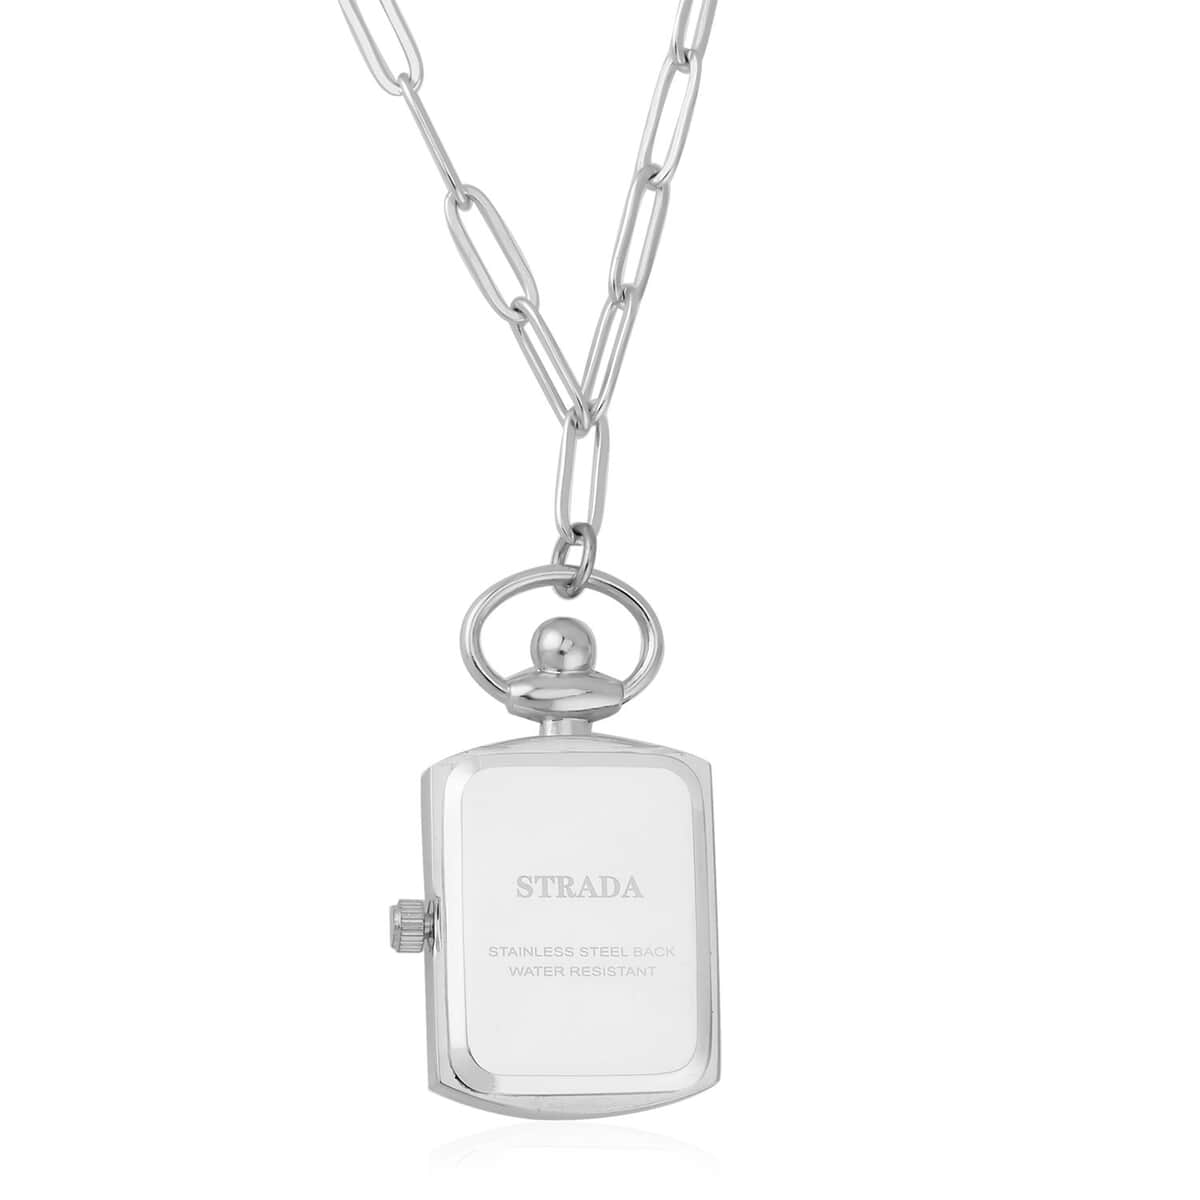 Strada Japanese Movement Pocket Or Pendant Watch in Silvertone with Paper Clip Stainless Steel Chain (21.84-27.94mm) (18- 30 Inches) image number 3